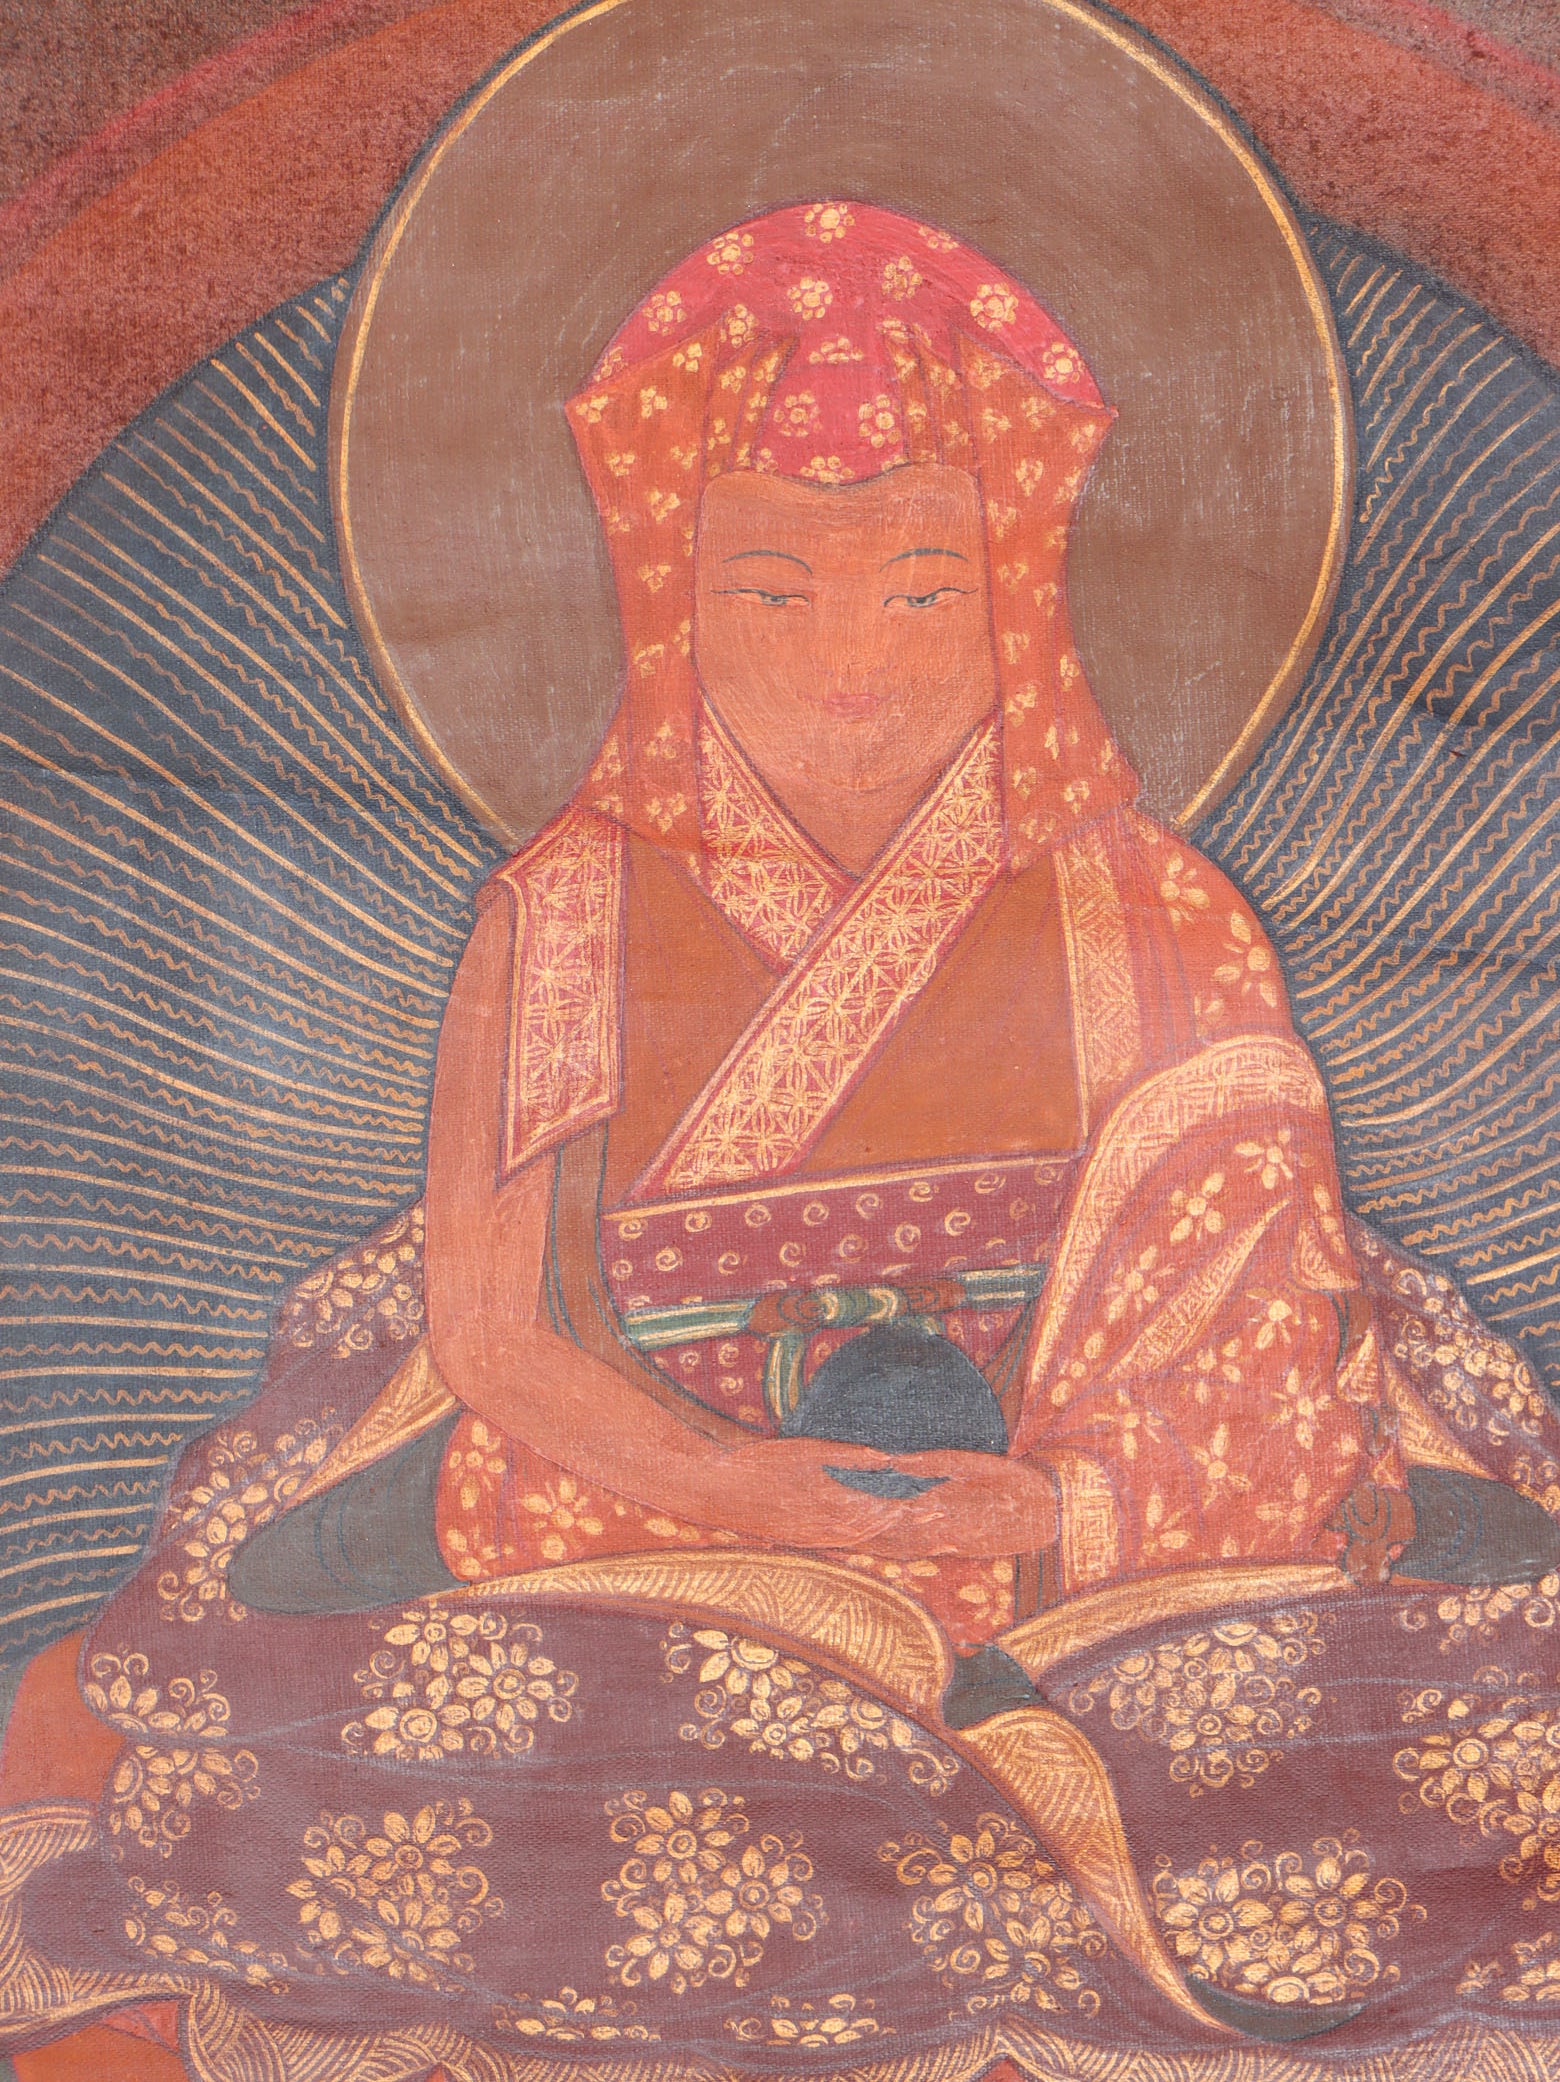 Antique Karmapa Thangka Painting for wisdom and compassion.